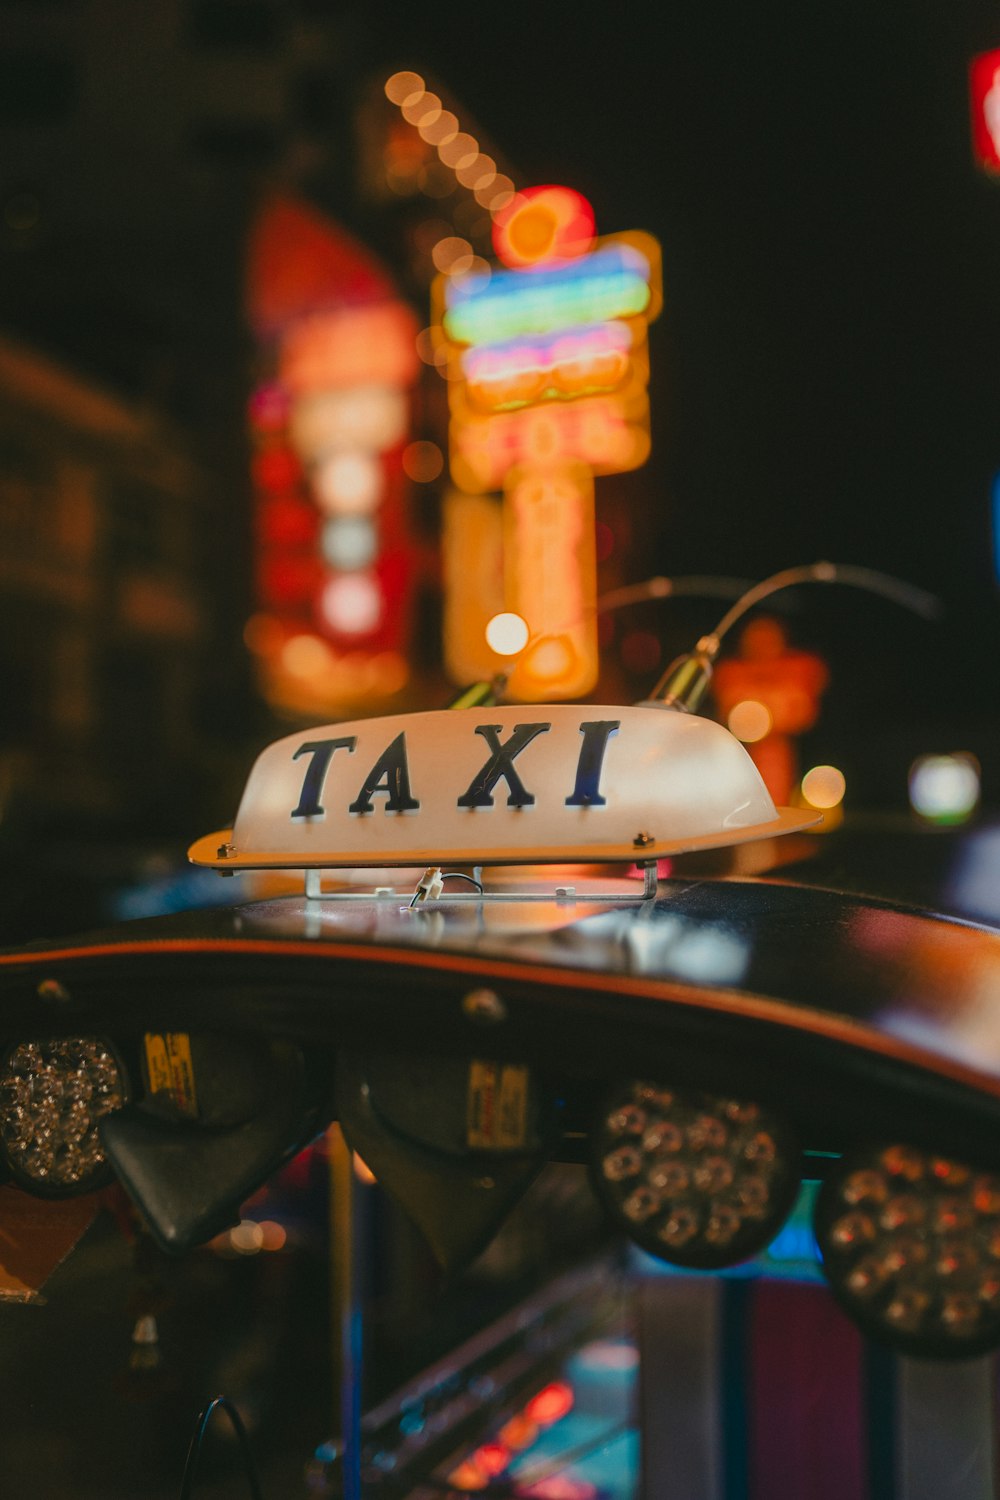 a taxi cab sitting in front of a neon sign